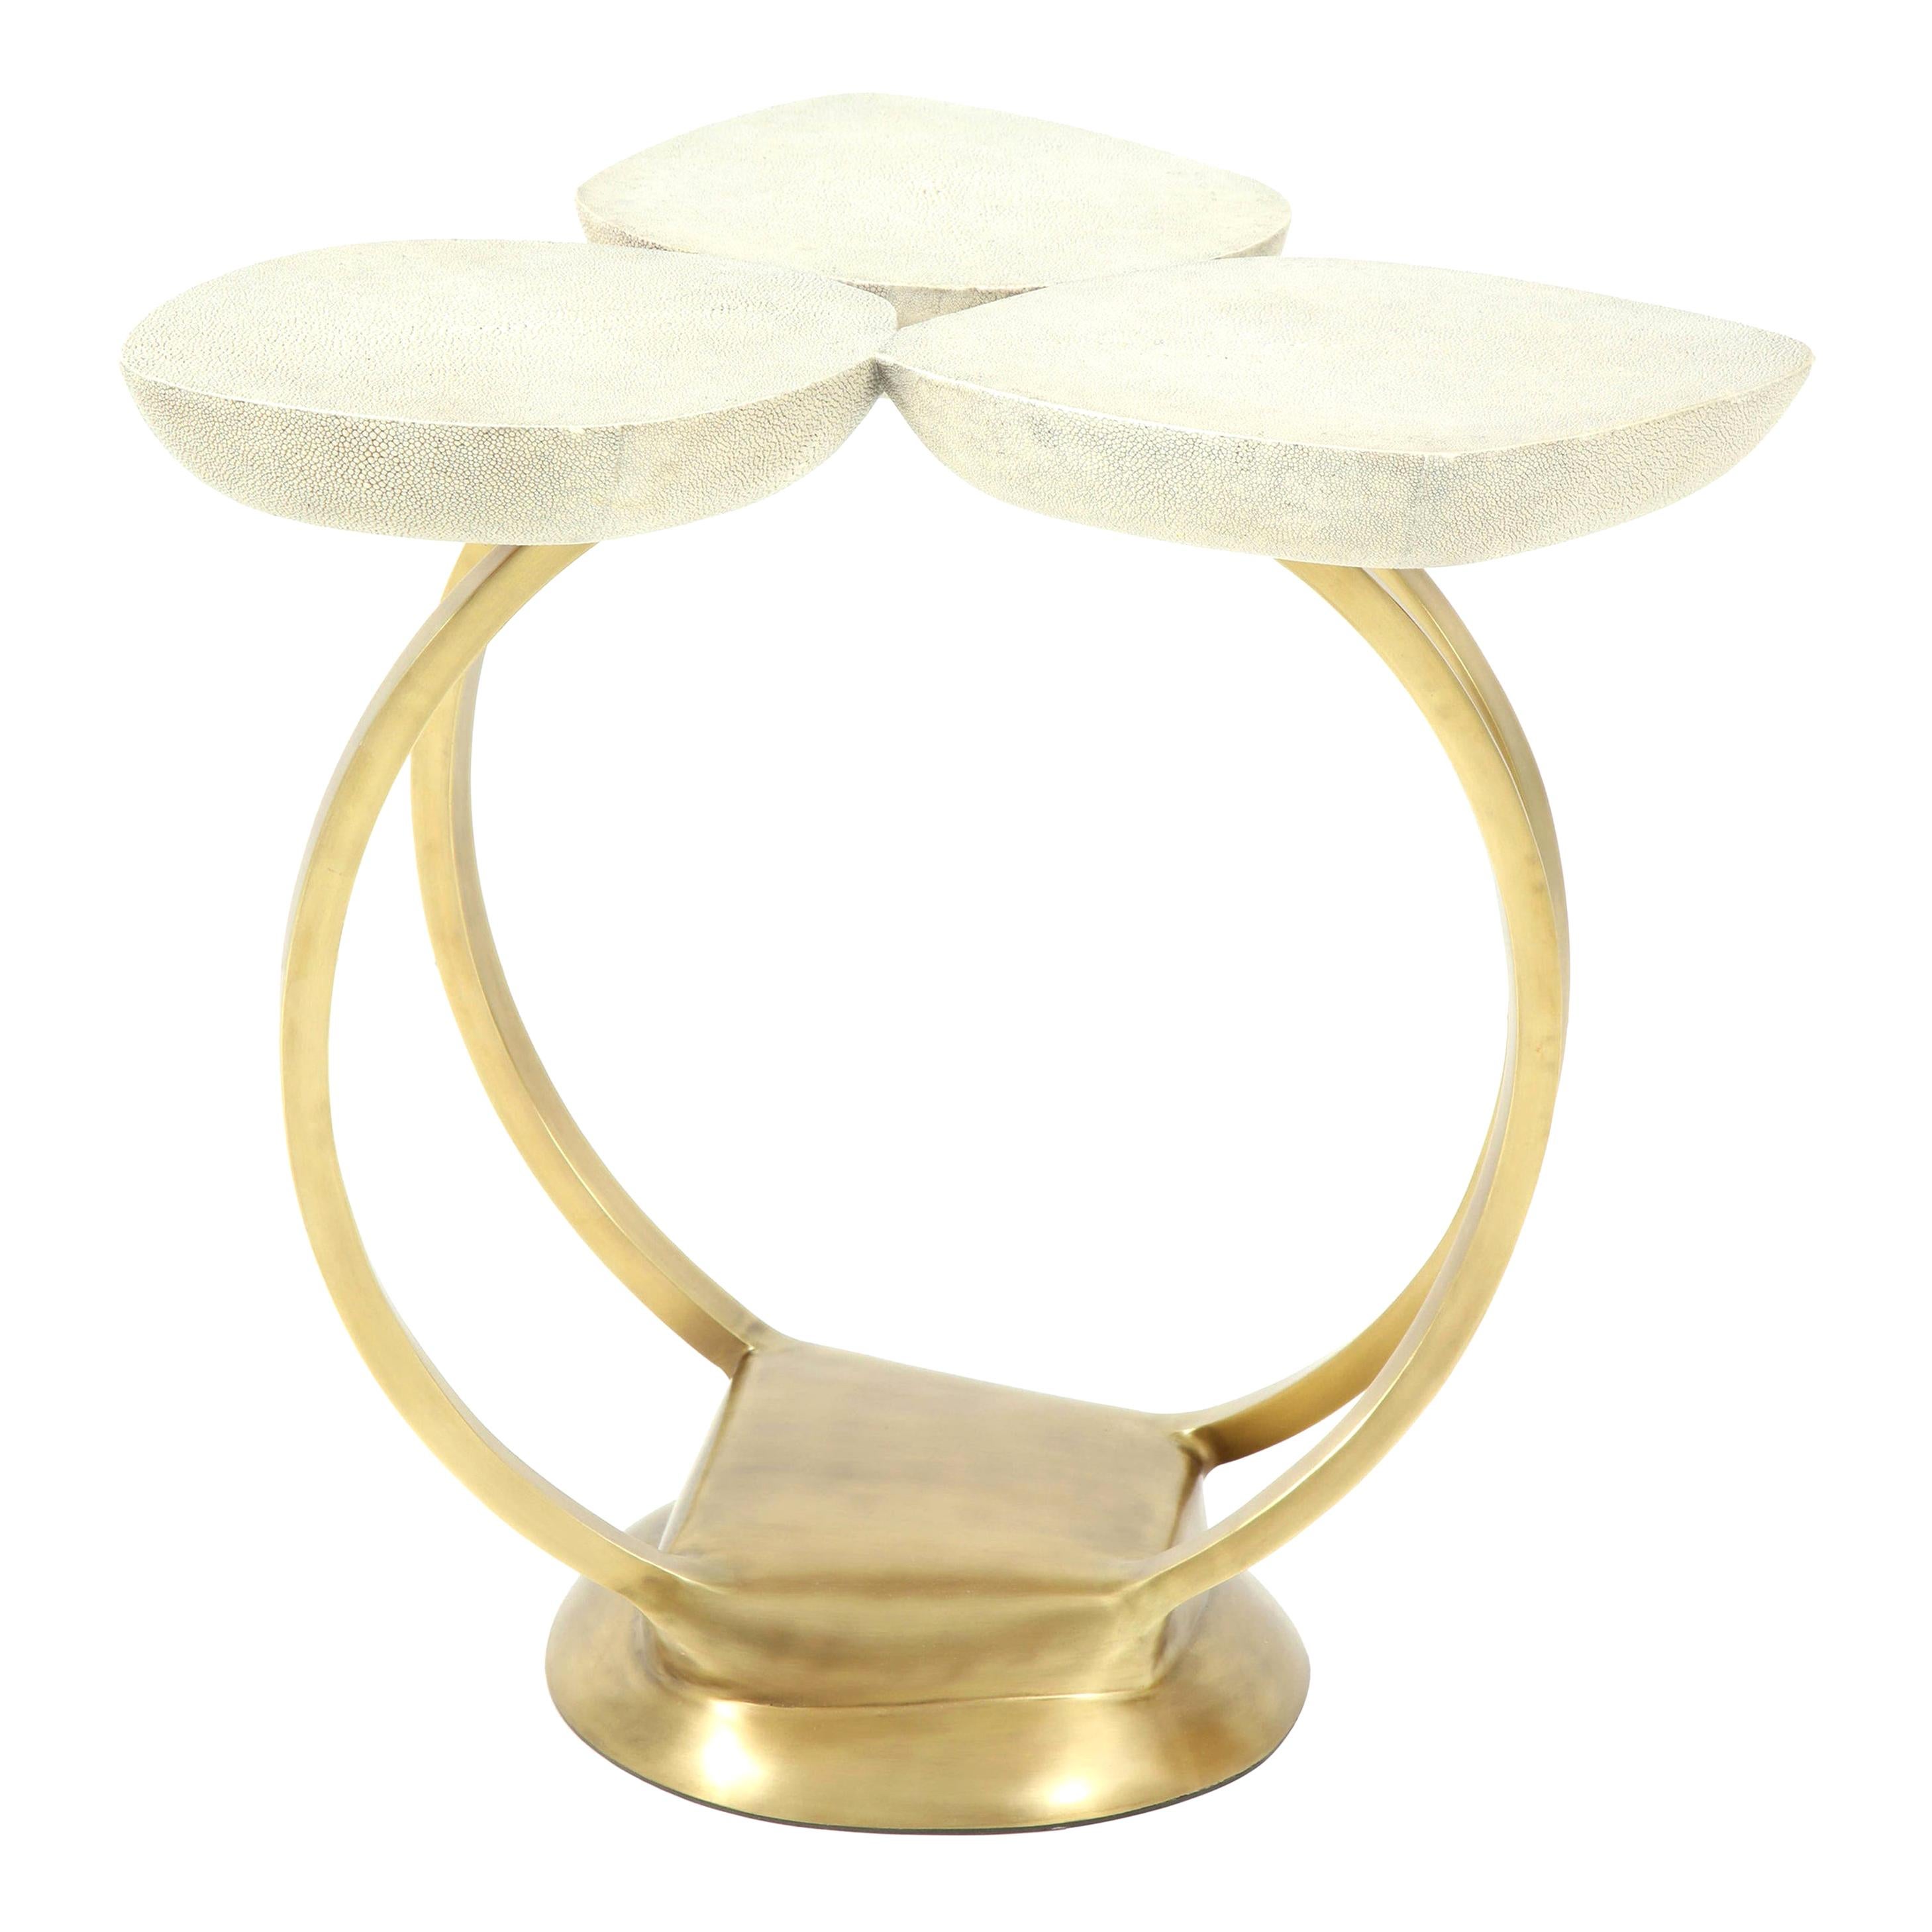 Shagreen Side Table with Brass Base, Cream Shagreen, Contemporary, Floral Design